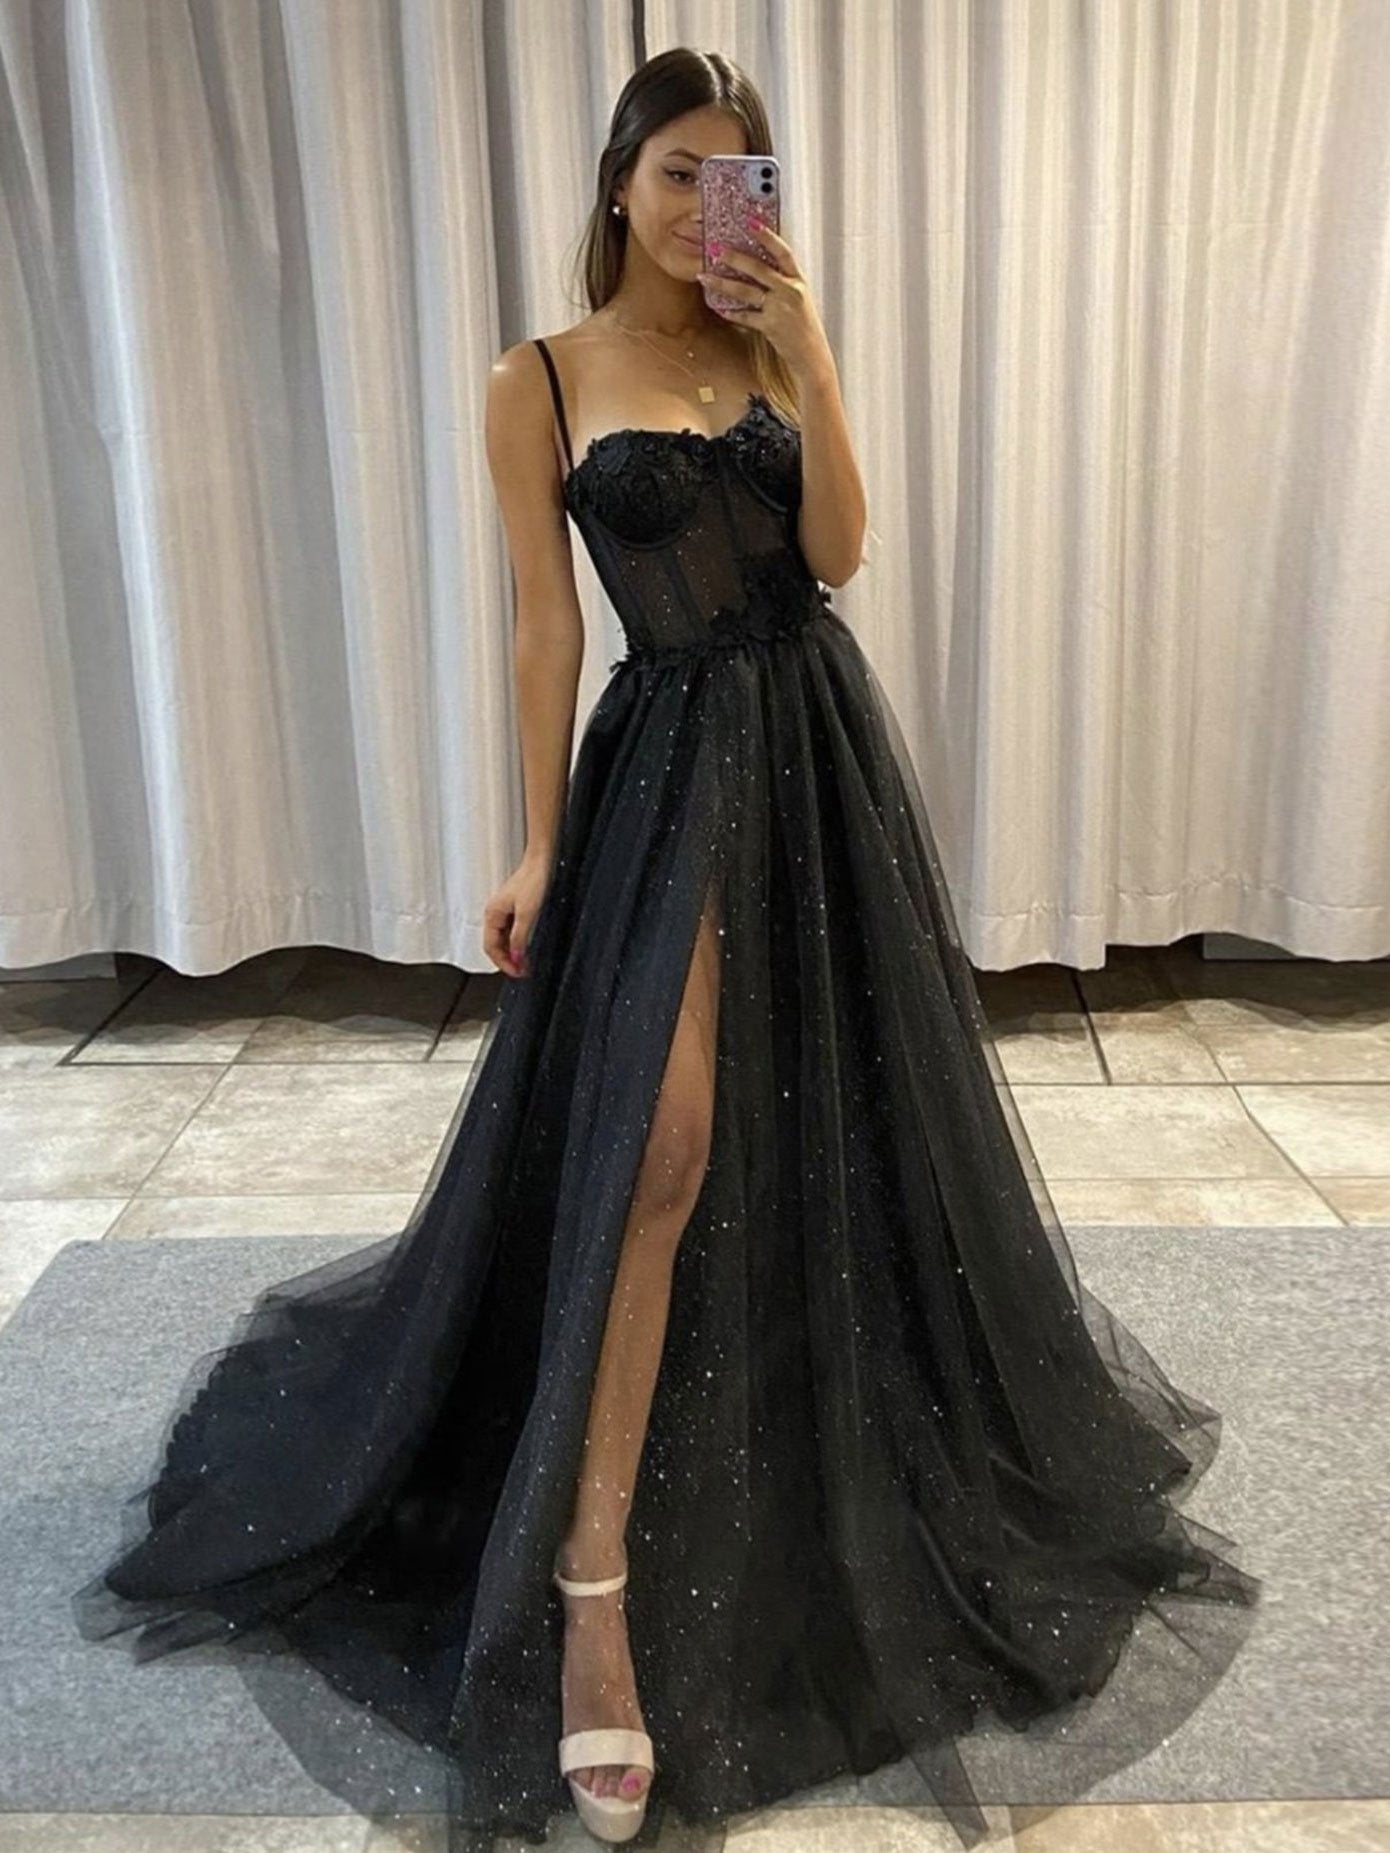 Black Sweetheart Neck Tulle Long Corset Prom Dress outfits, Cocktail Dress